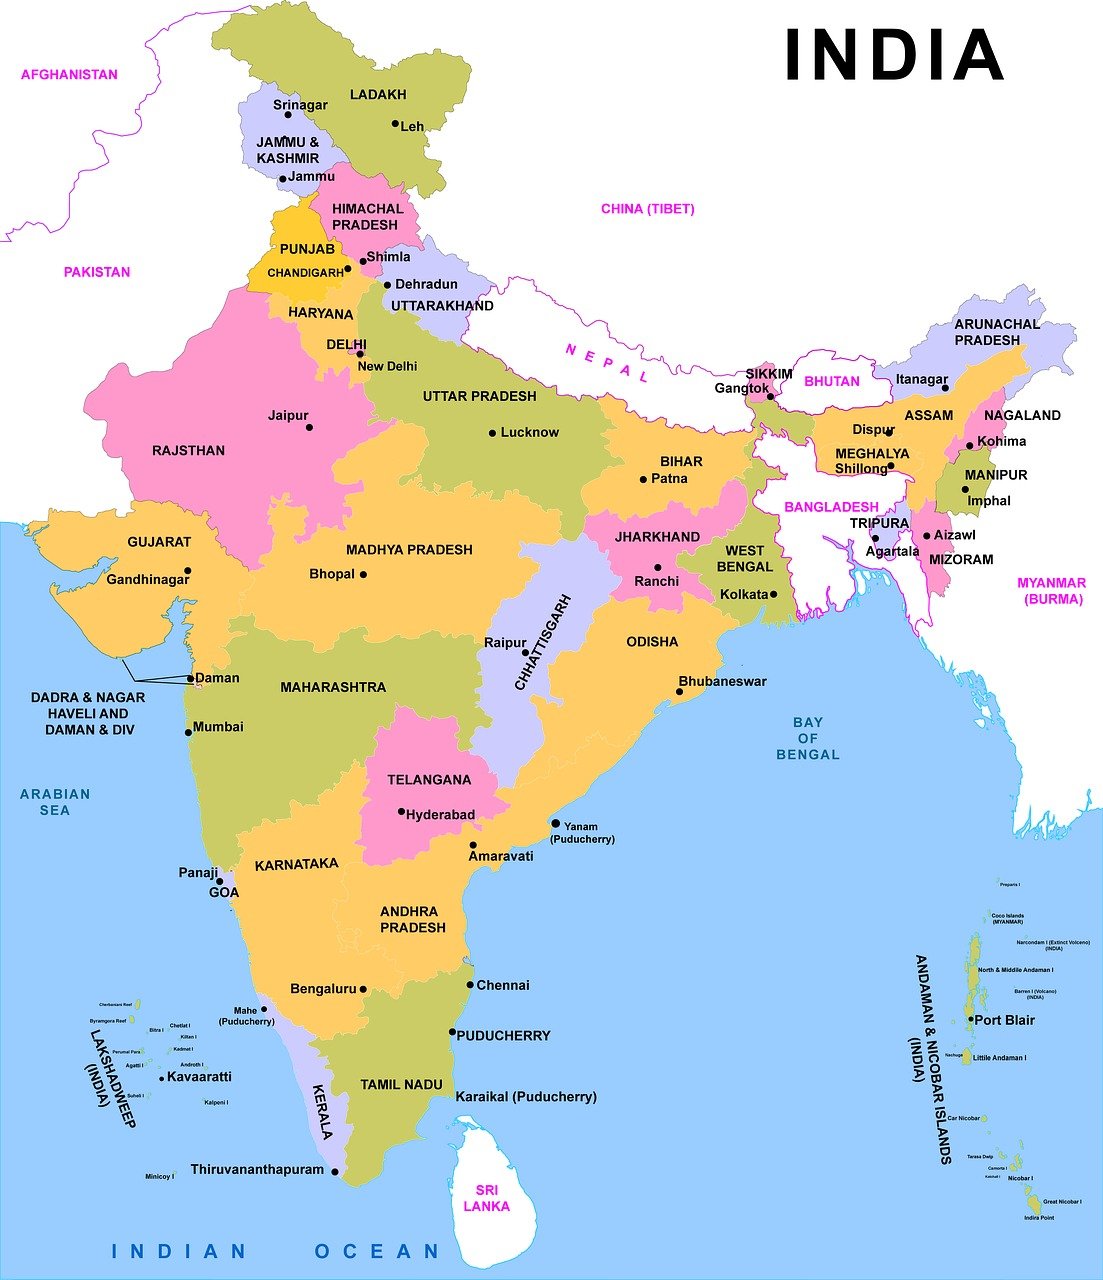 The Largest and Smallest States of India | Area, City, Population & More